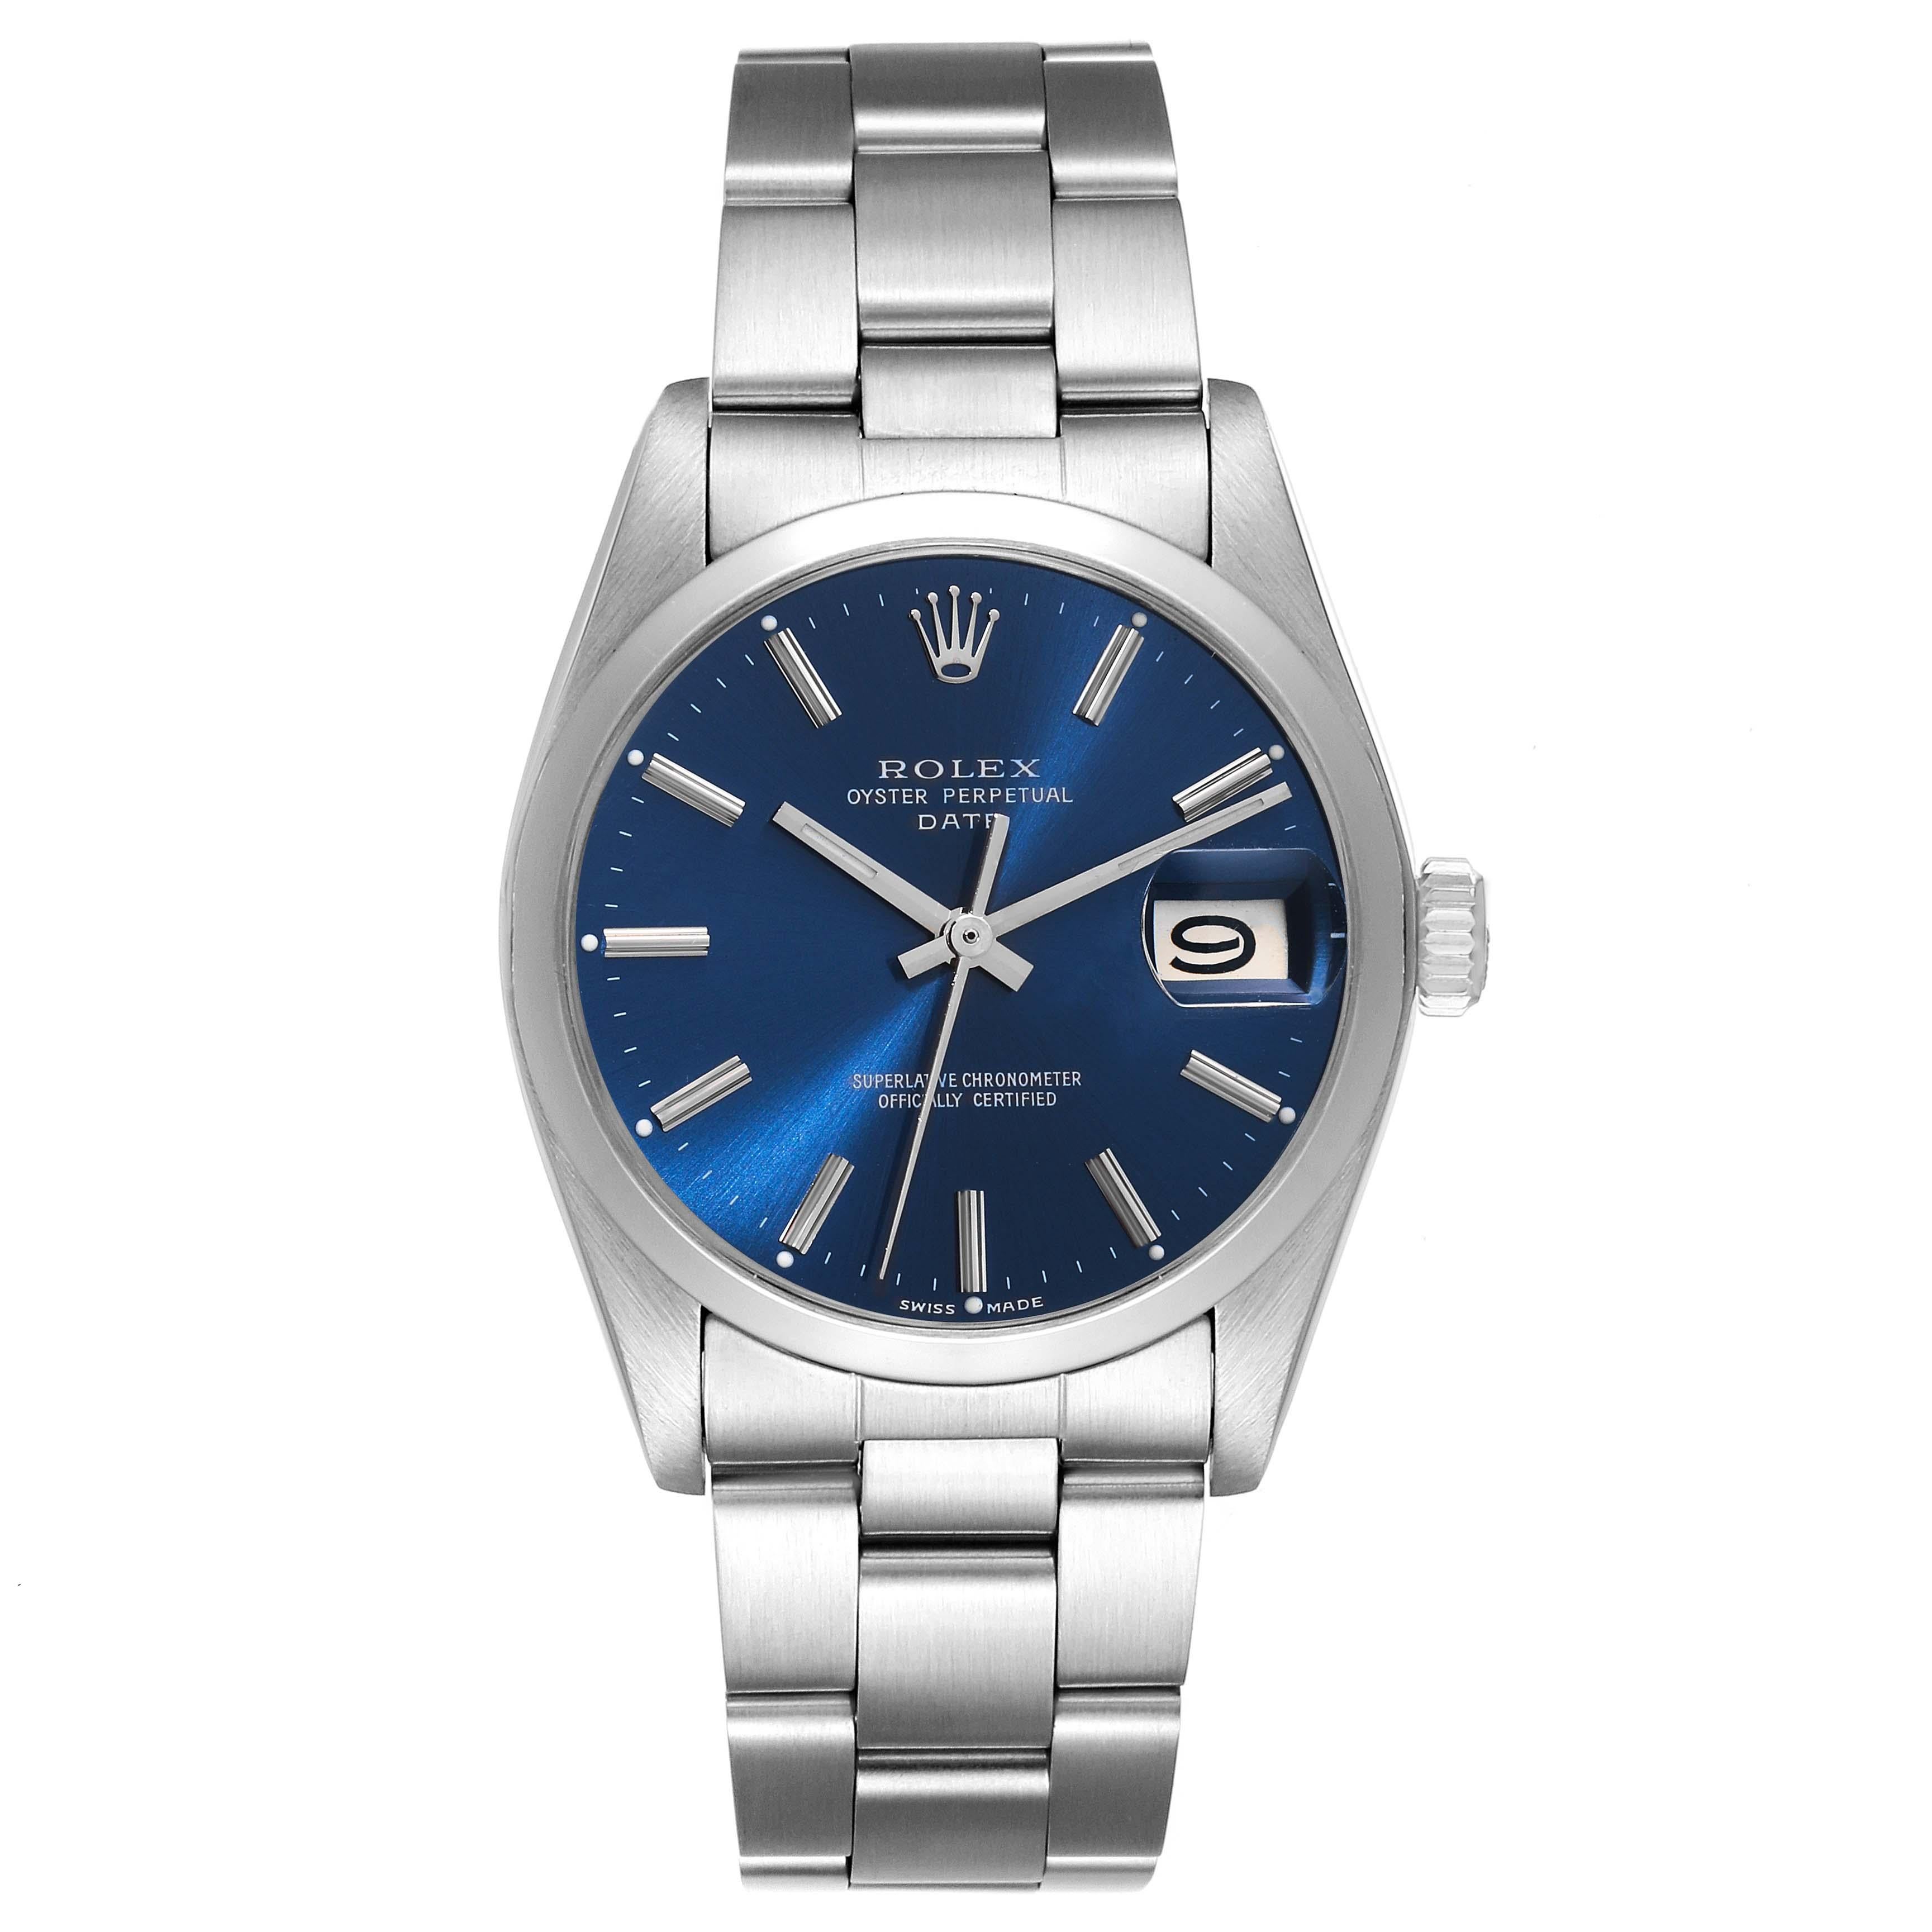 Rolex Date Blue Dial Vintage Steel Mens Watch 1500. Officially certified chronometer automatic self-winding movement. Stainless steel oyster case 34.0 mm in diameter. Rolex logo on the crown. Stainless steel smooth bezel. Acrylic crystal with